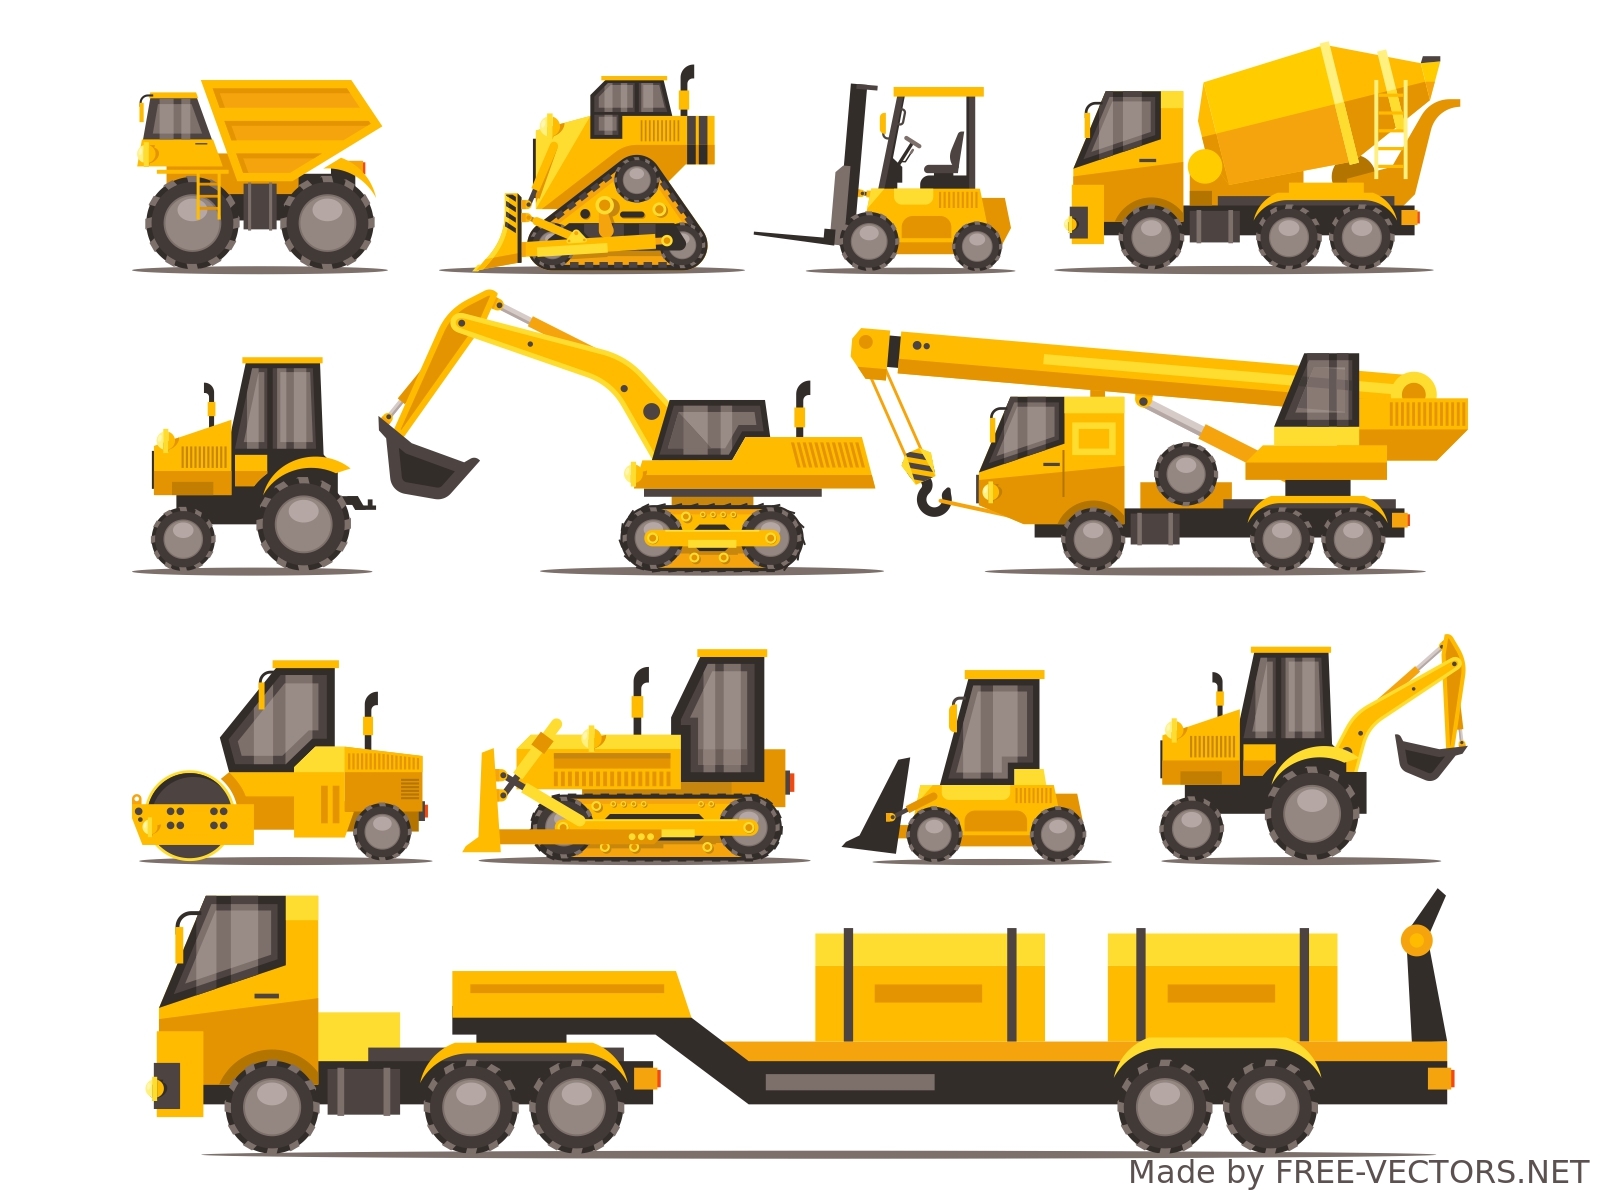 Types of Heavy Equipment and their uses – The Complete Guide